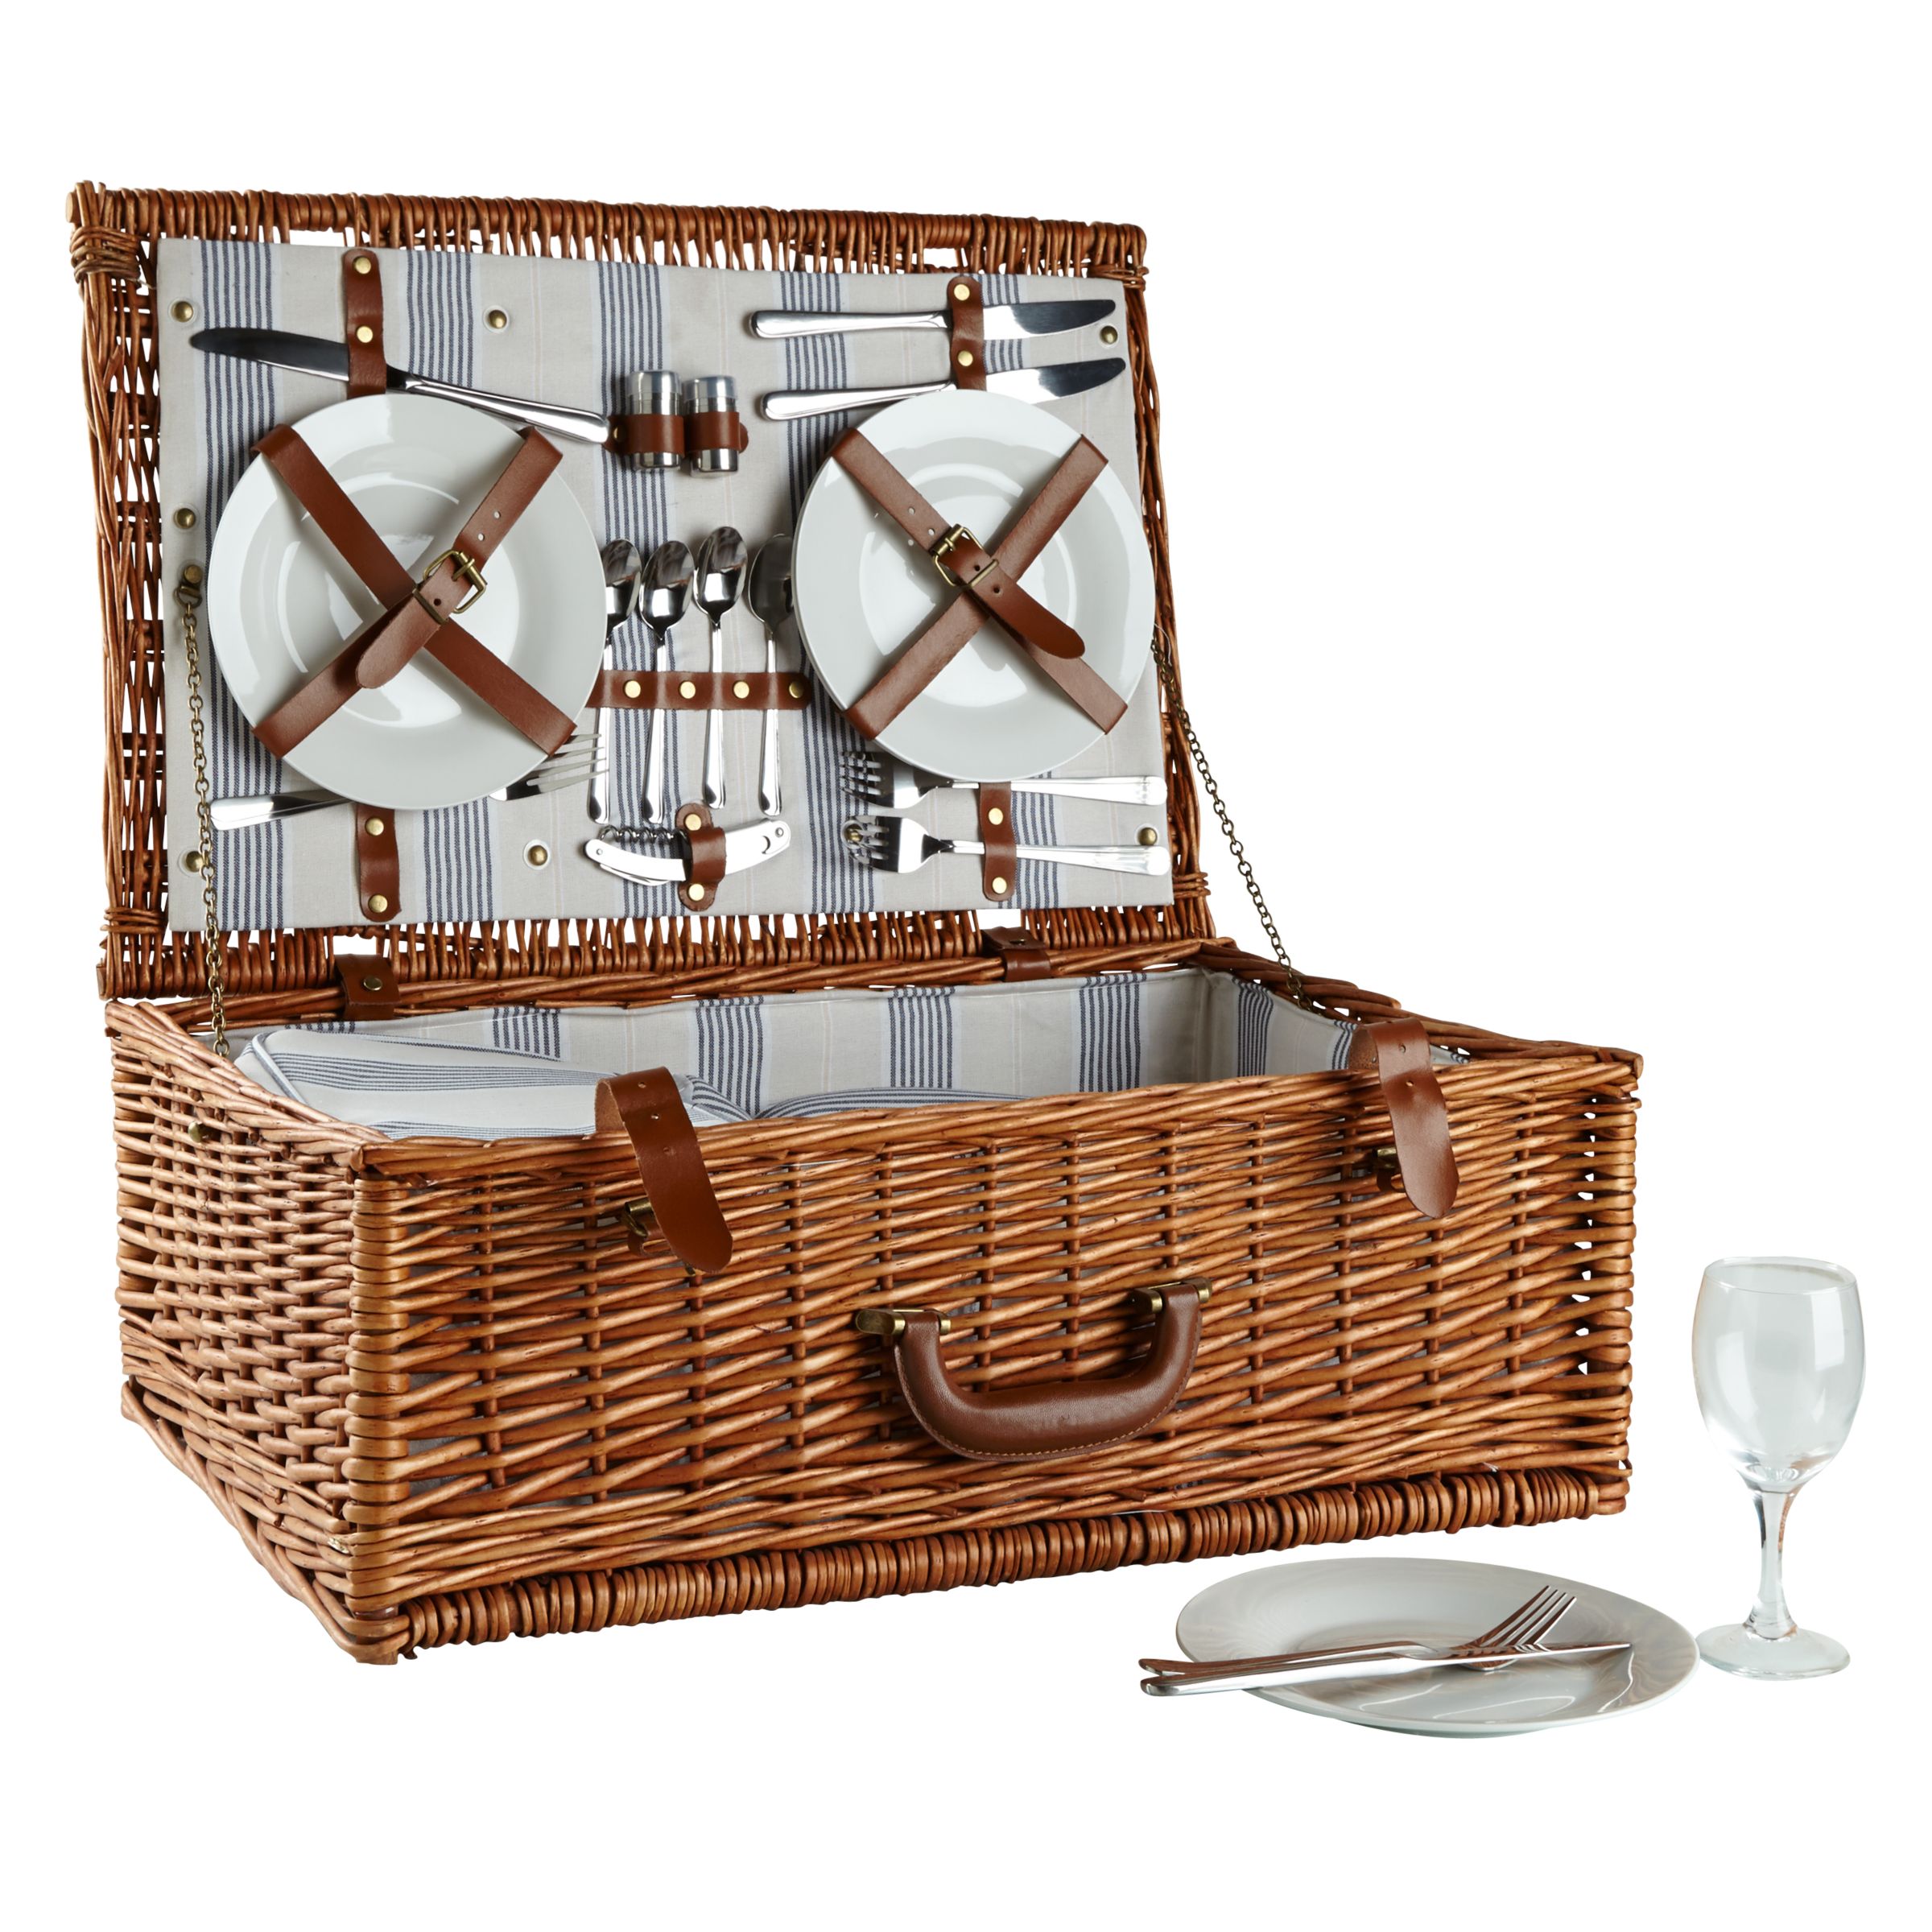 John Lewis Luxury Willow Striped Picnic Hamper, 4 Persons